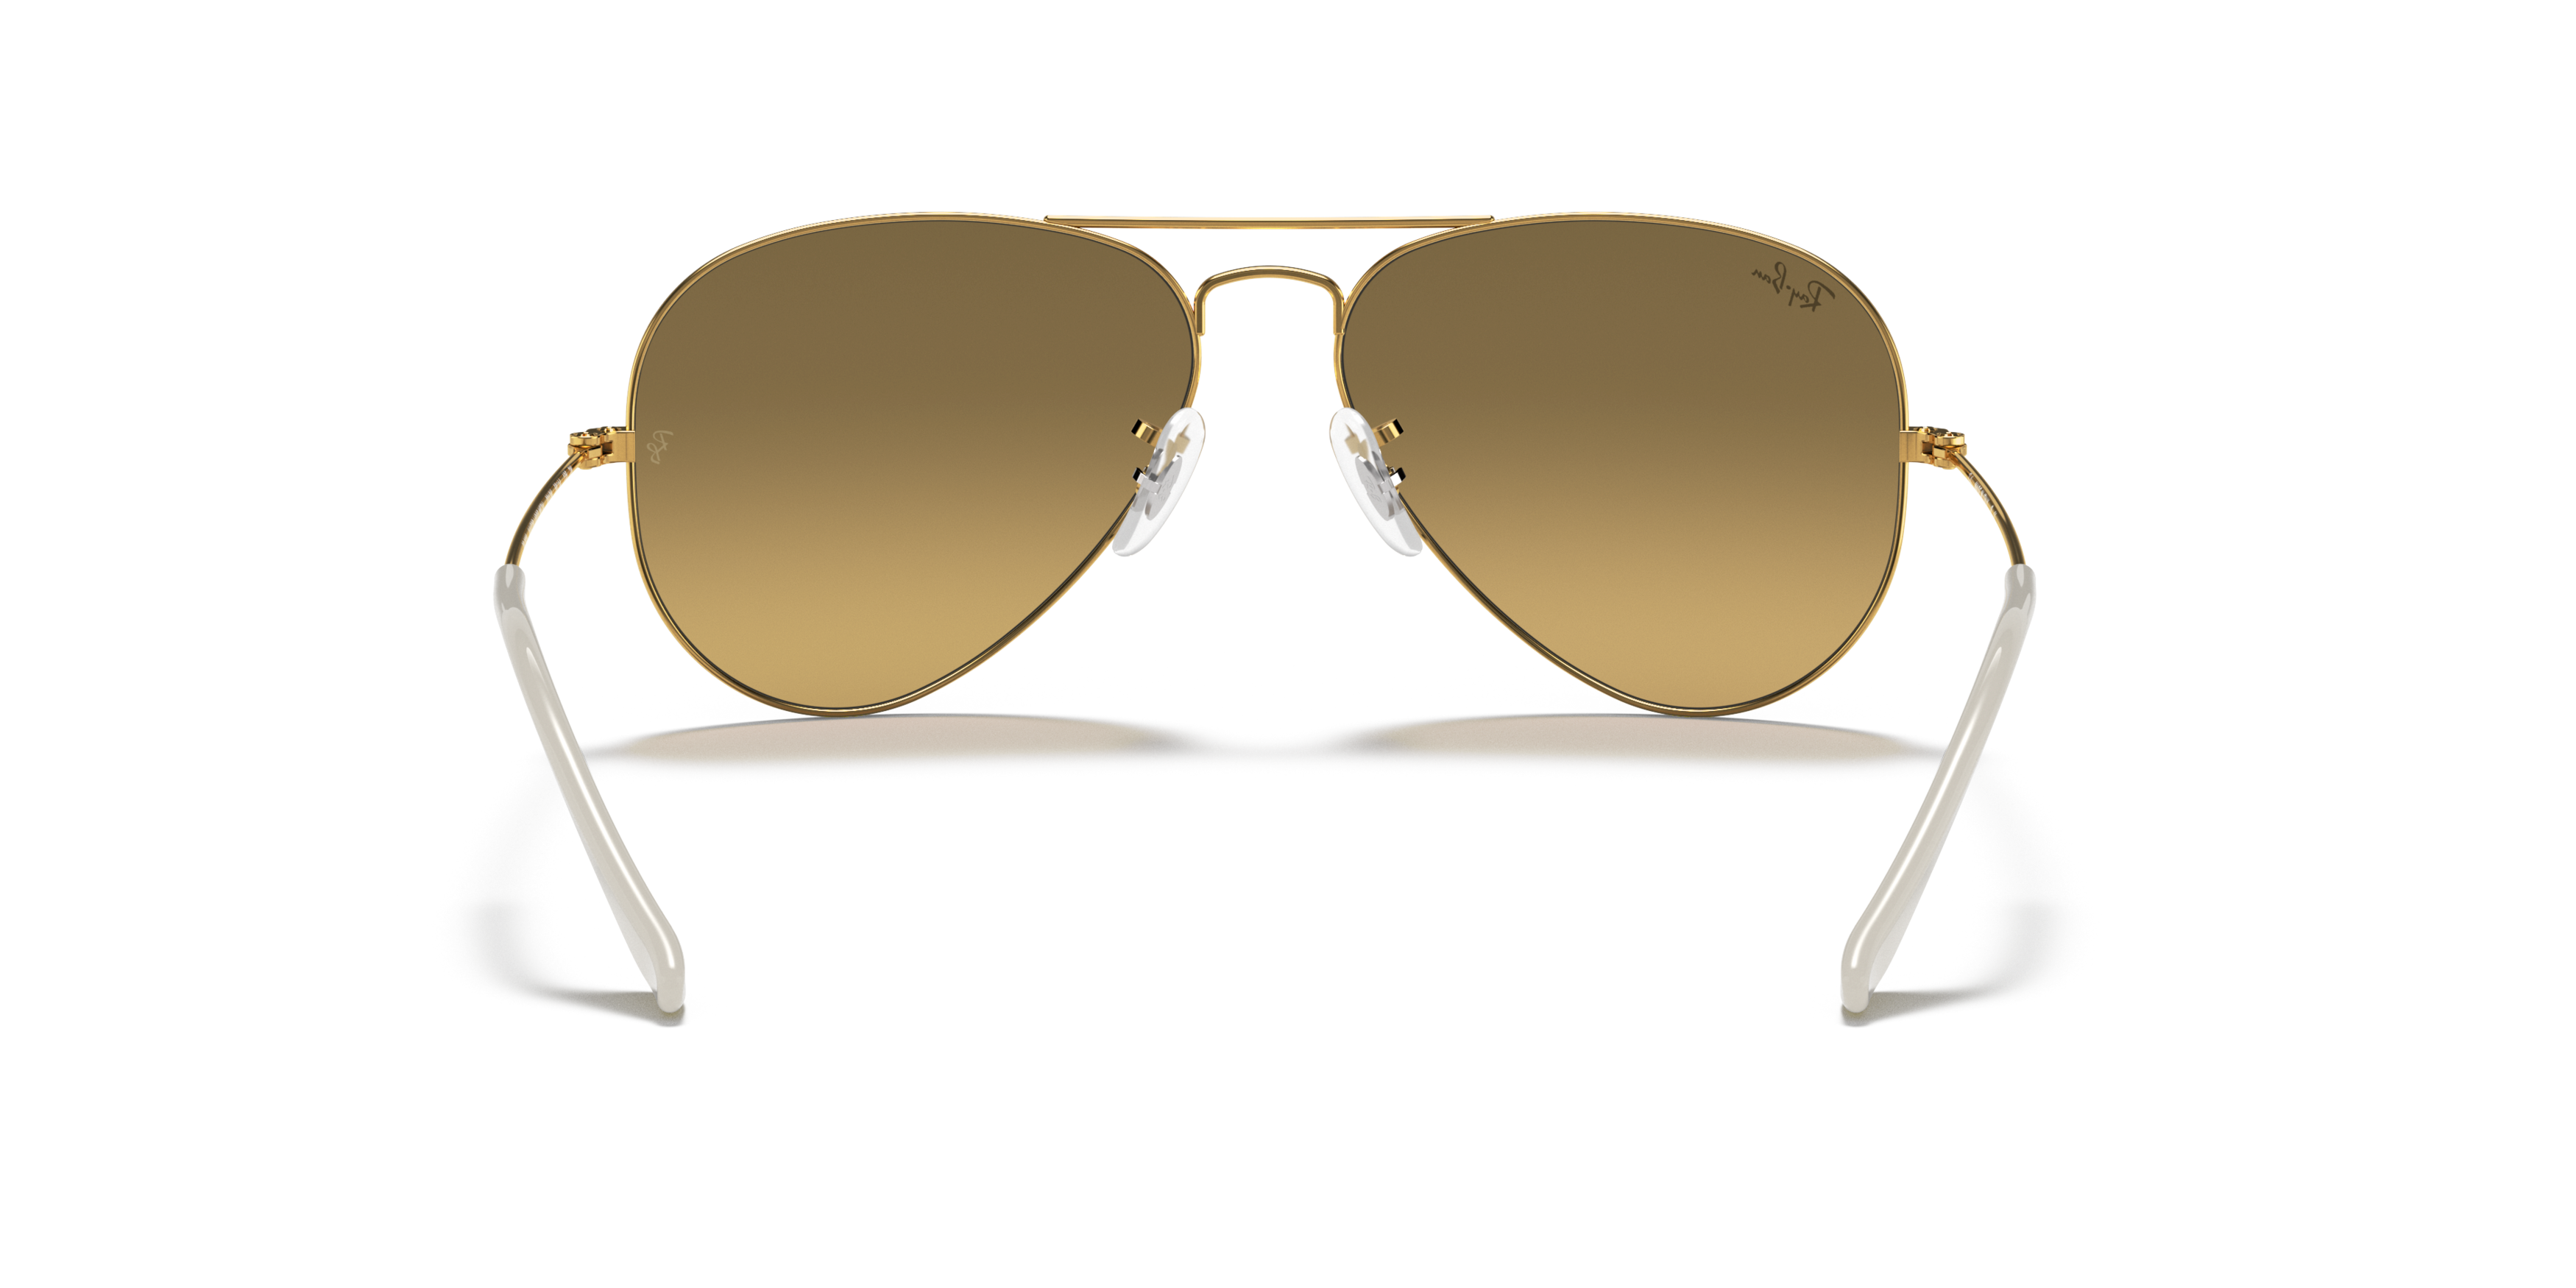 [products.image.detail02] Ray-Ban Aviator Gradient RB3025 001/3K